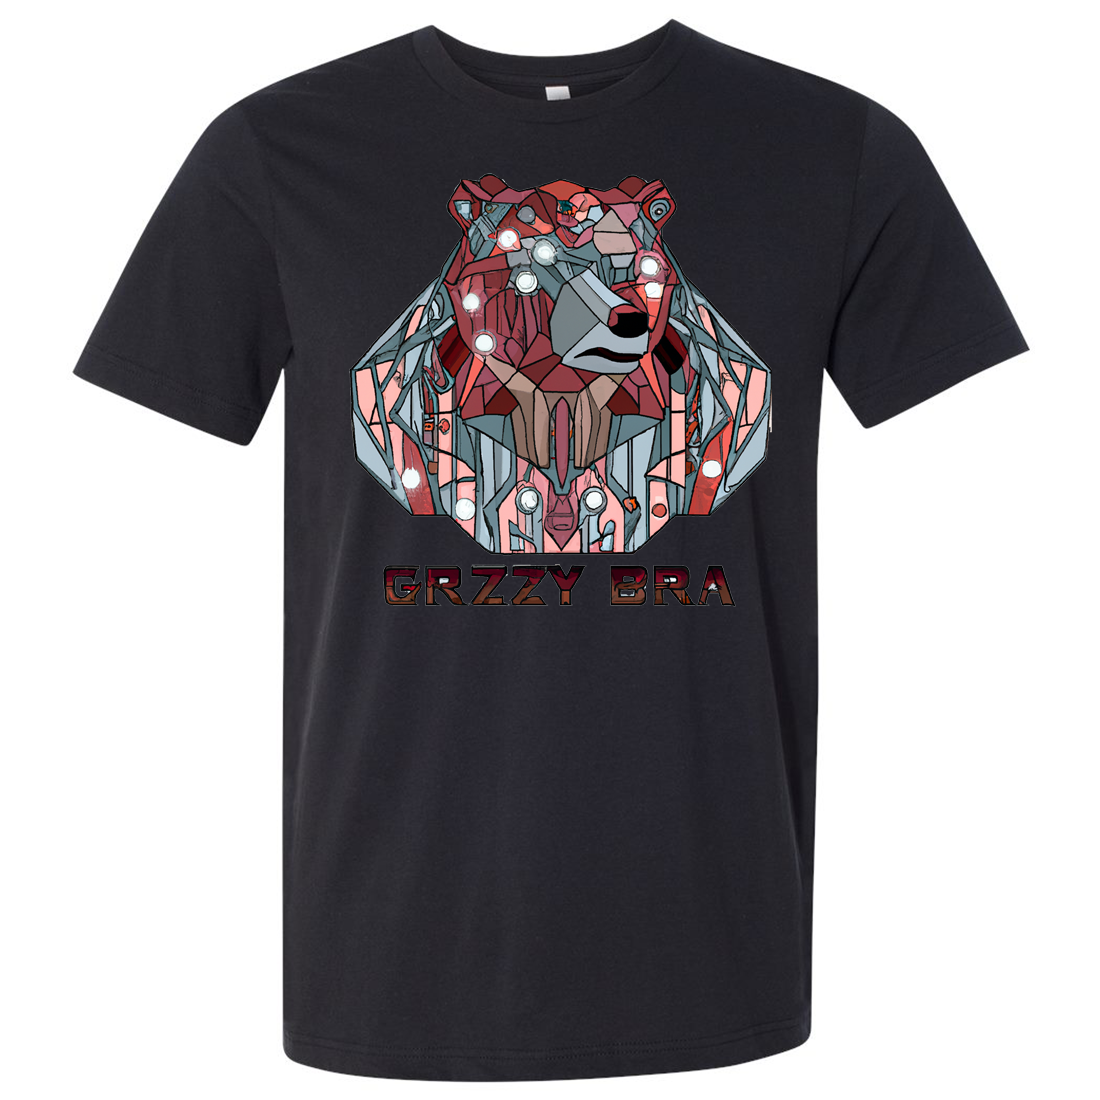 Stained Glass Cyborg Grizzly Bear GRZZY BRA Asst Colors Mens Lightweight Fitted T-Shirt/tee